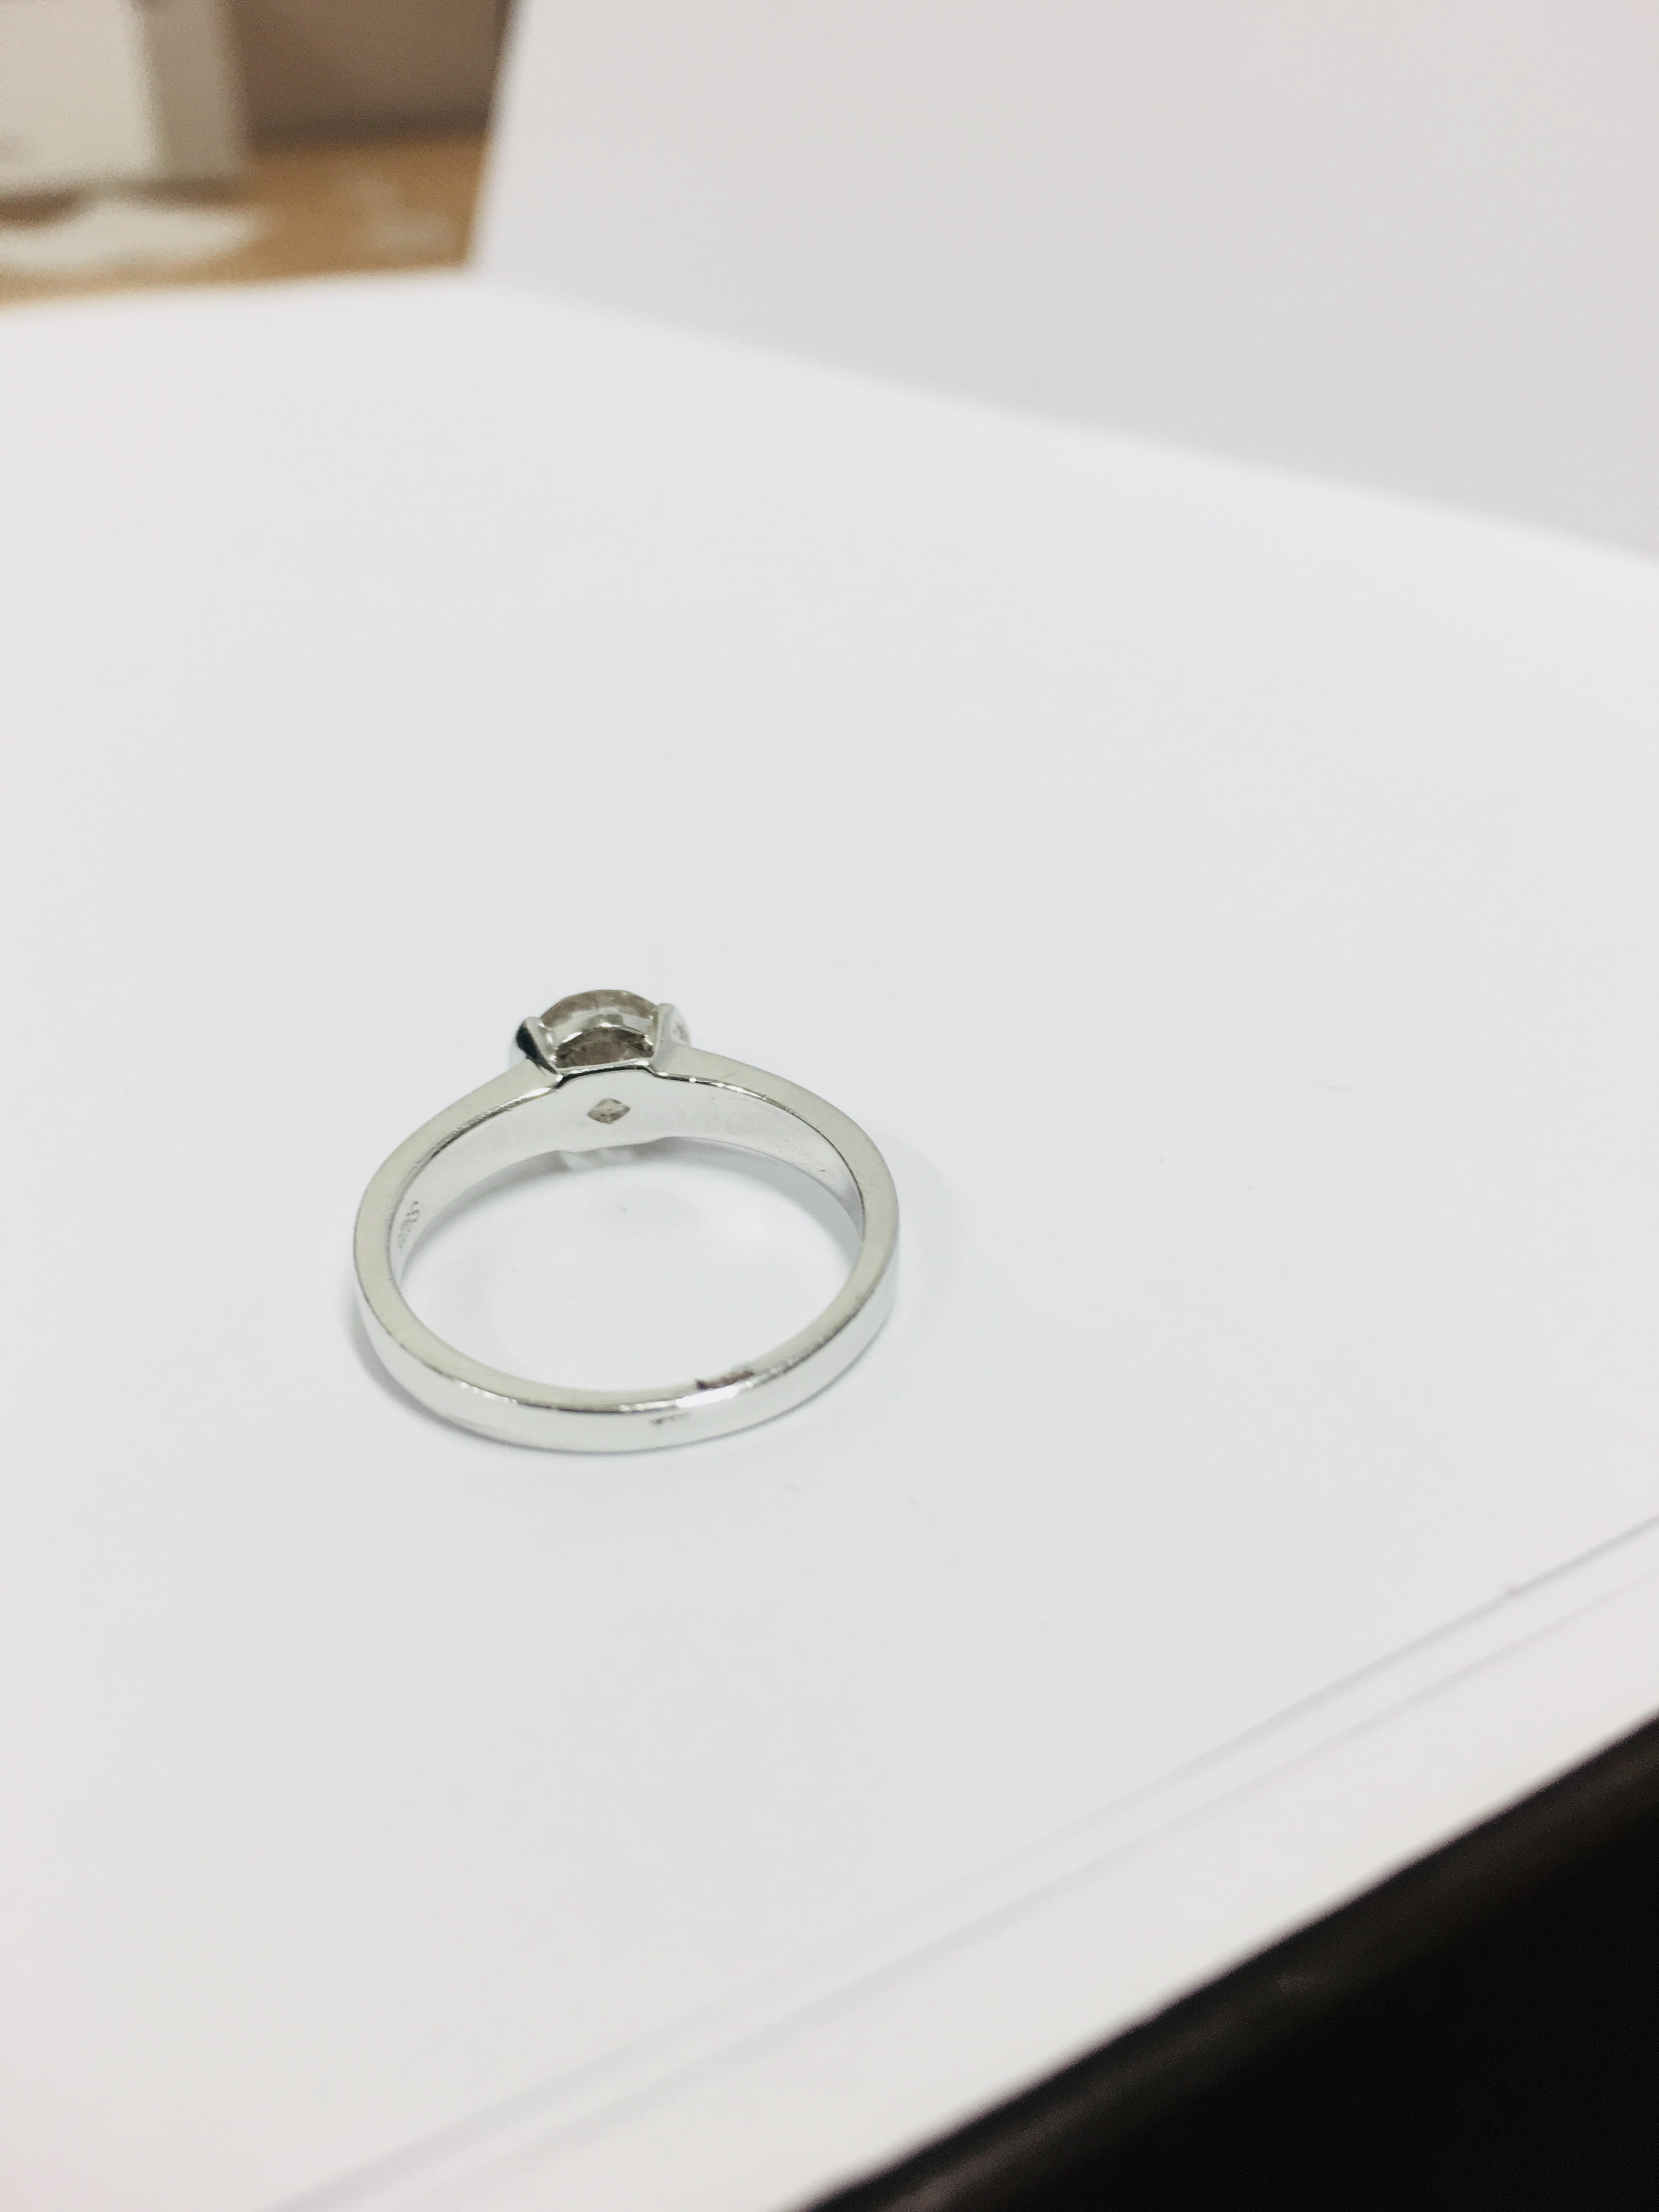 1.06ct diamond solitaire ring with a brilliant cut diamond - Image 3 of 4